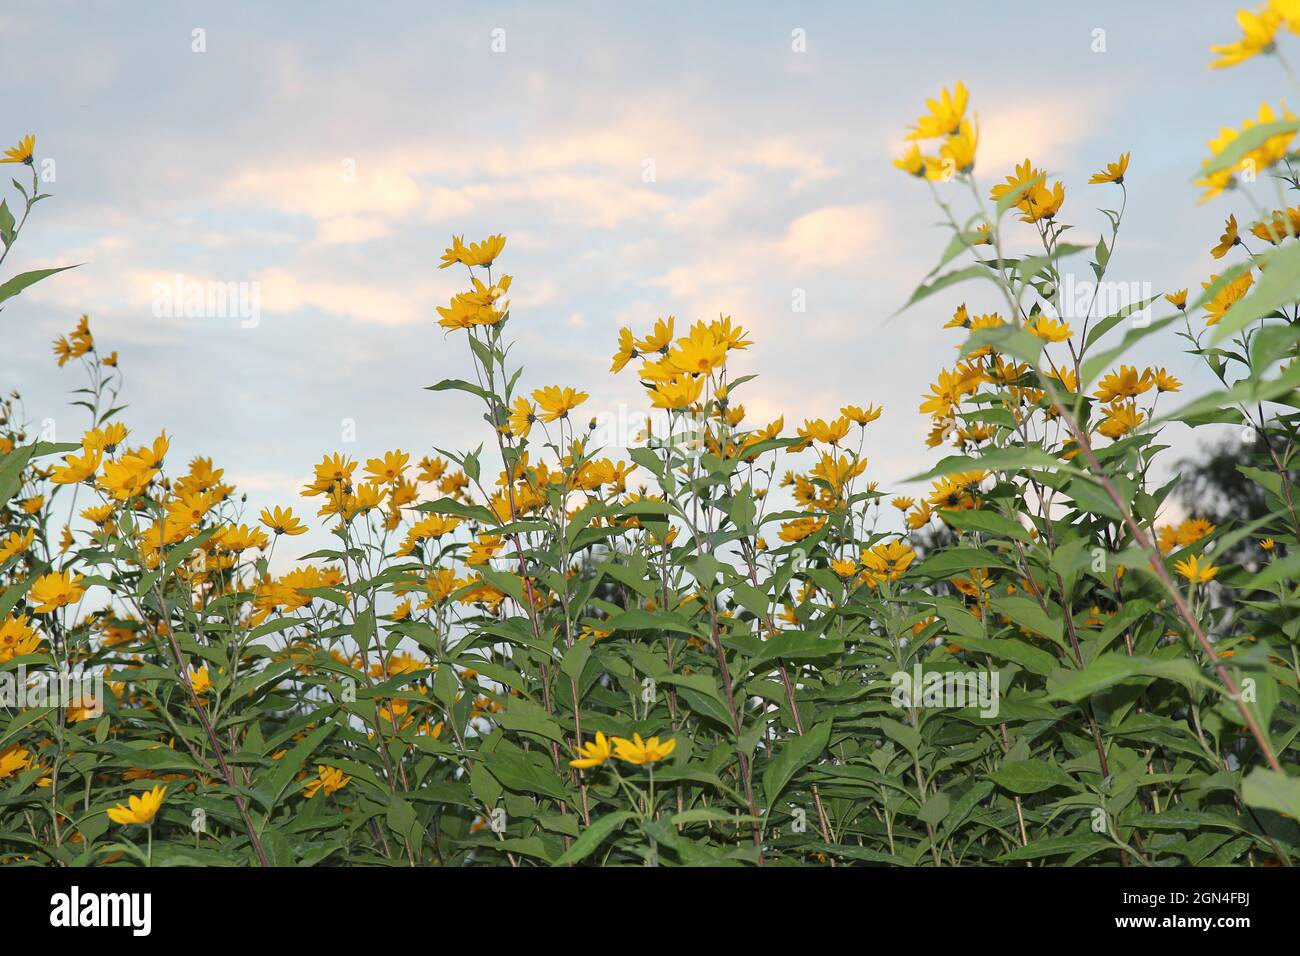 Blooming sun root, blooming topinambour, autumn vegetable on field in front of blue sky. Stock Photo